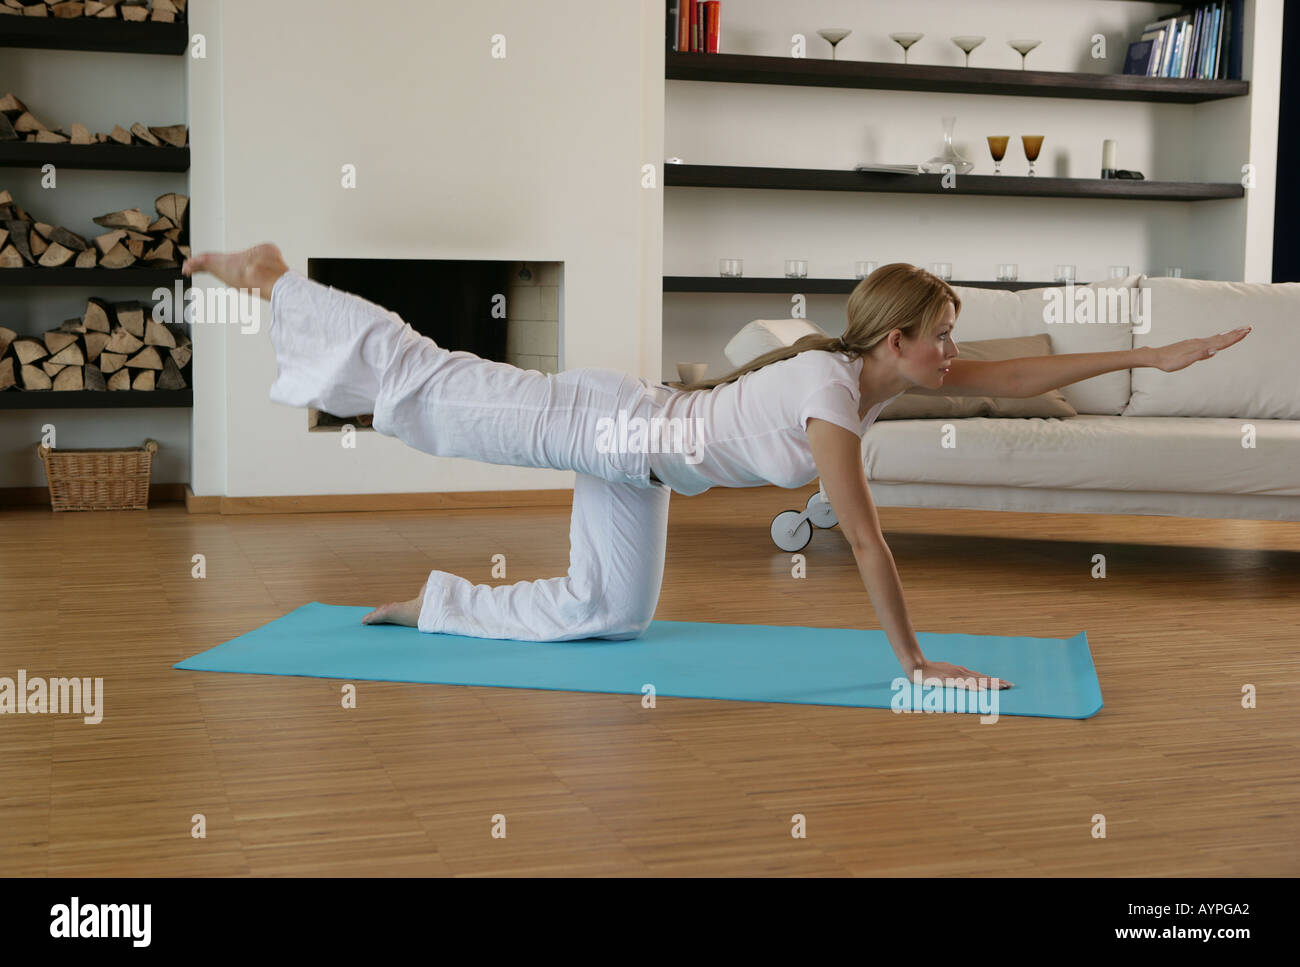 A blonde woman performing an exercise on the floor Stock Photo